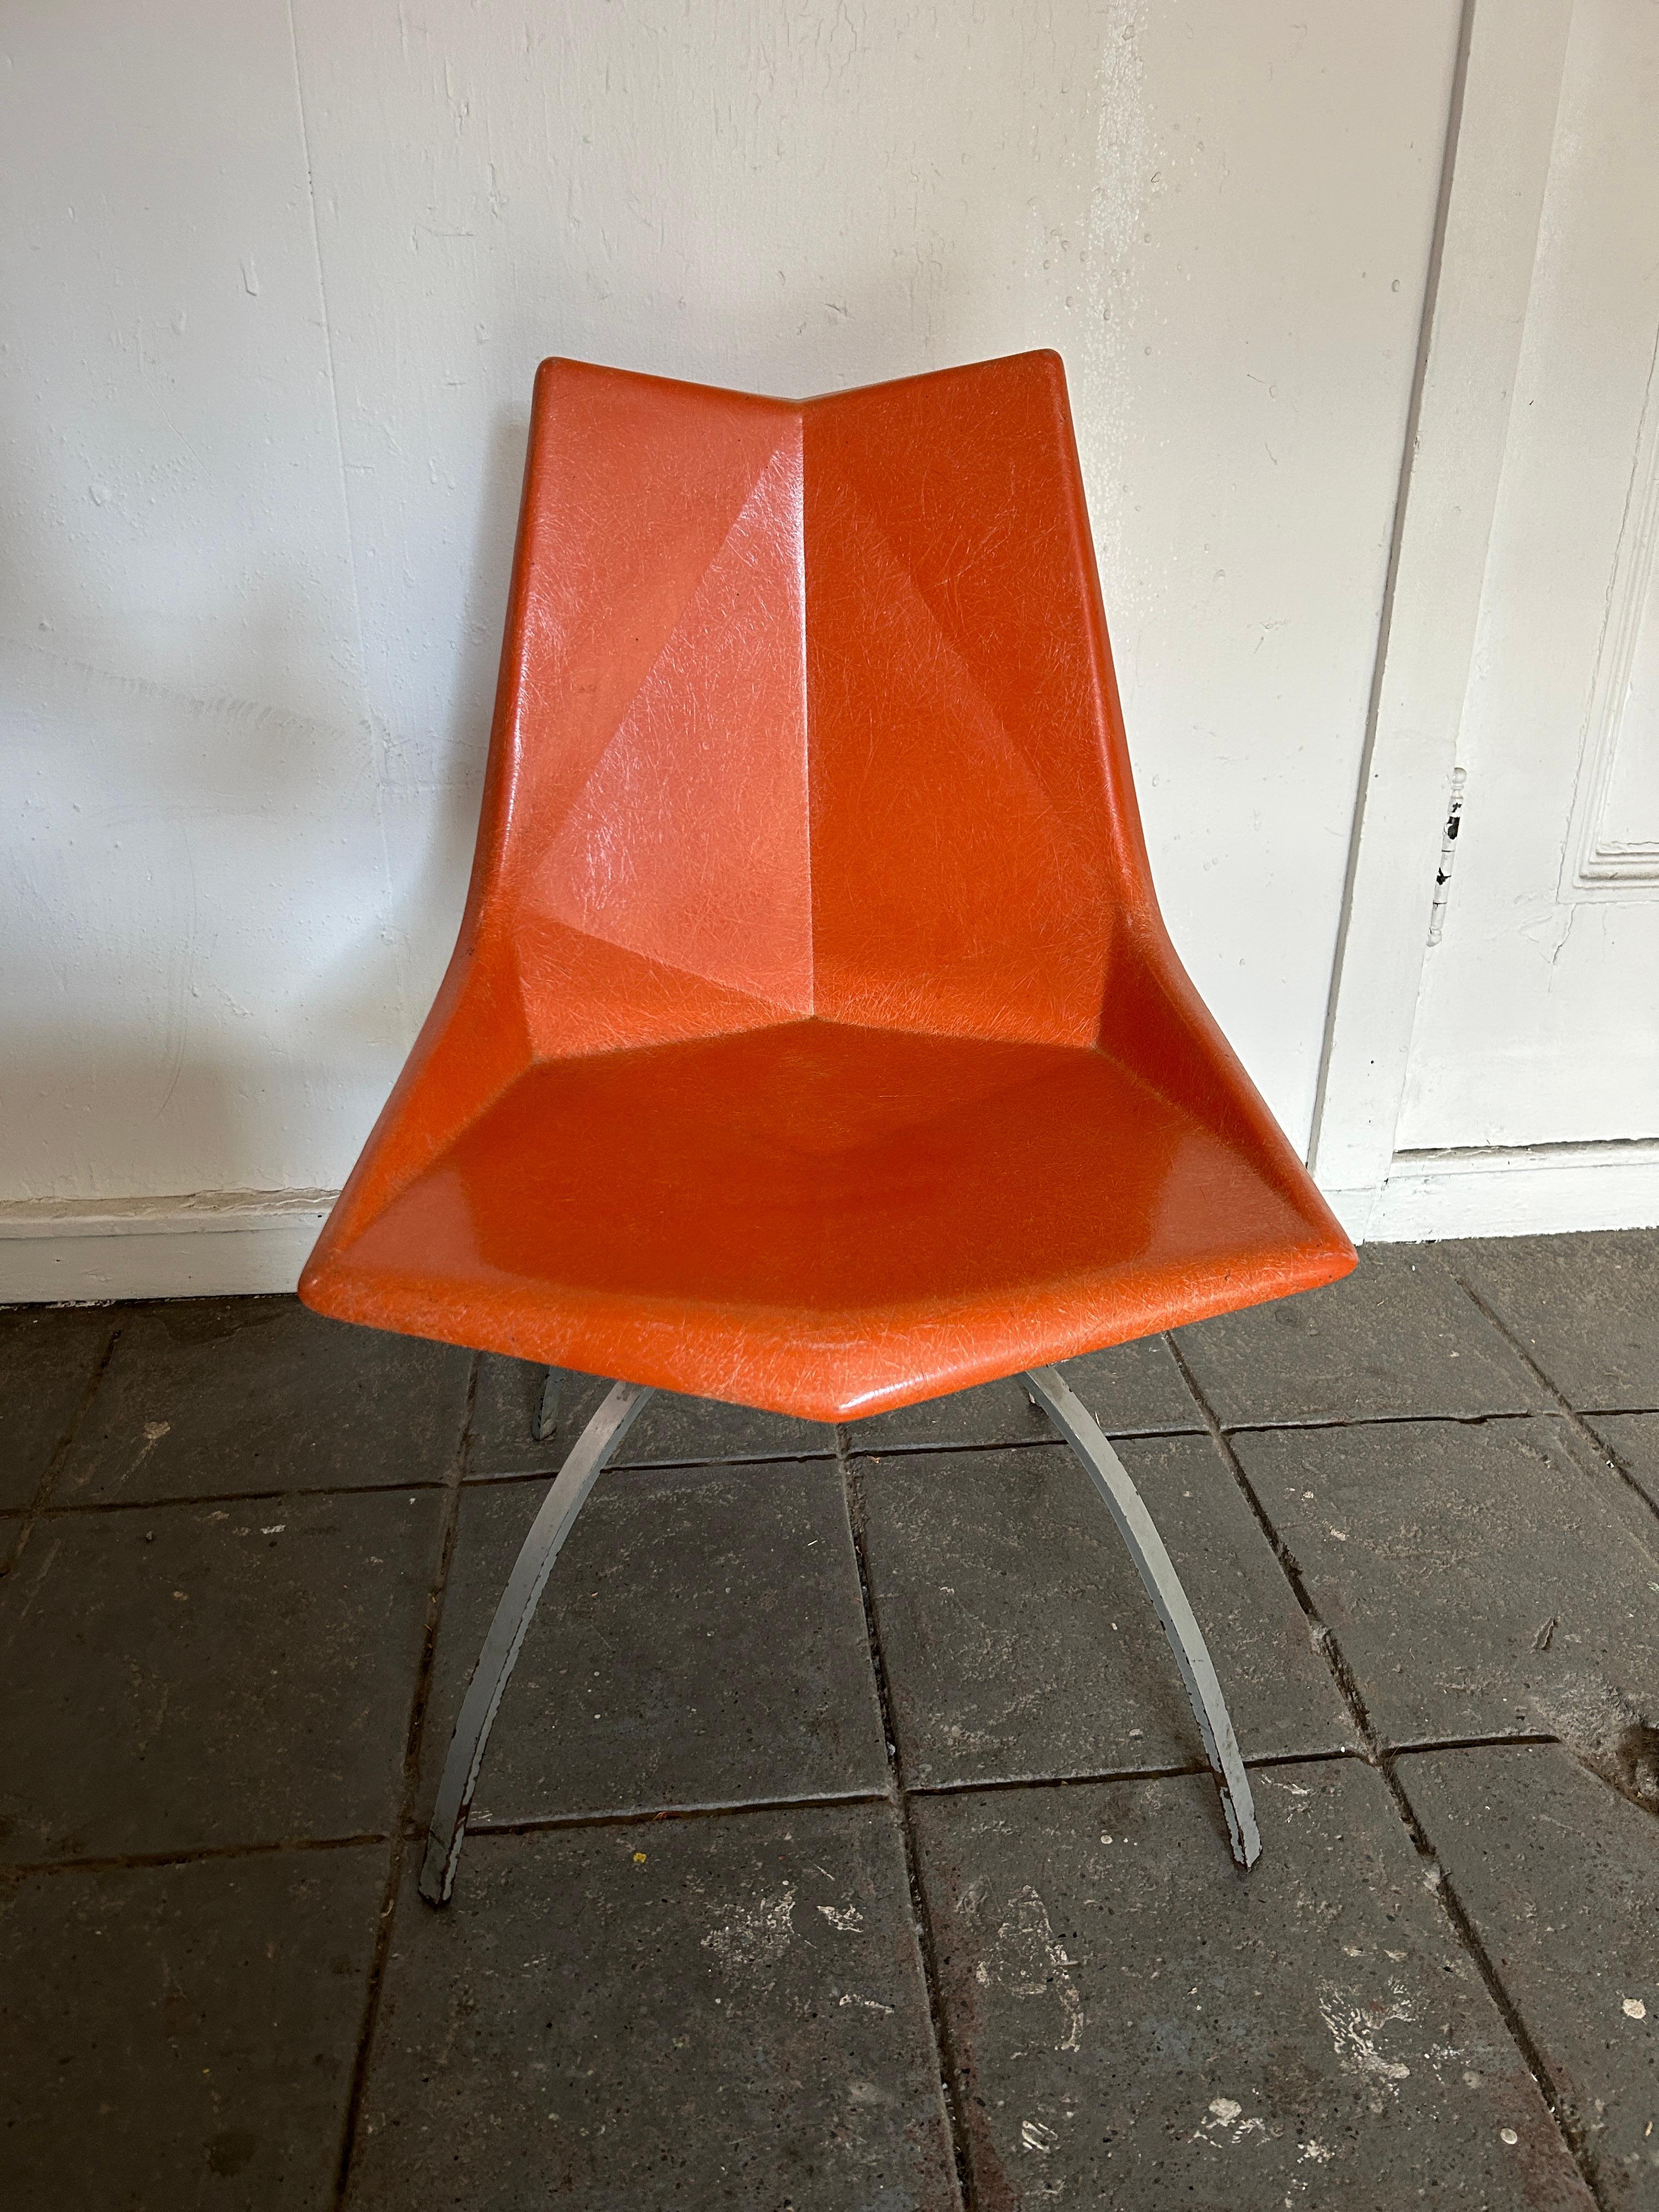 Original mid century orange Paul McCobb origami fiberglass shell has steel spider bases. Can be used inside or outside. These side chairs are by Paul McCobb by St. John Seating Corp. New York. Very rare chairs. Located in Brooklyn NYC.

(1) orange